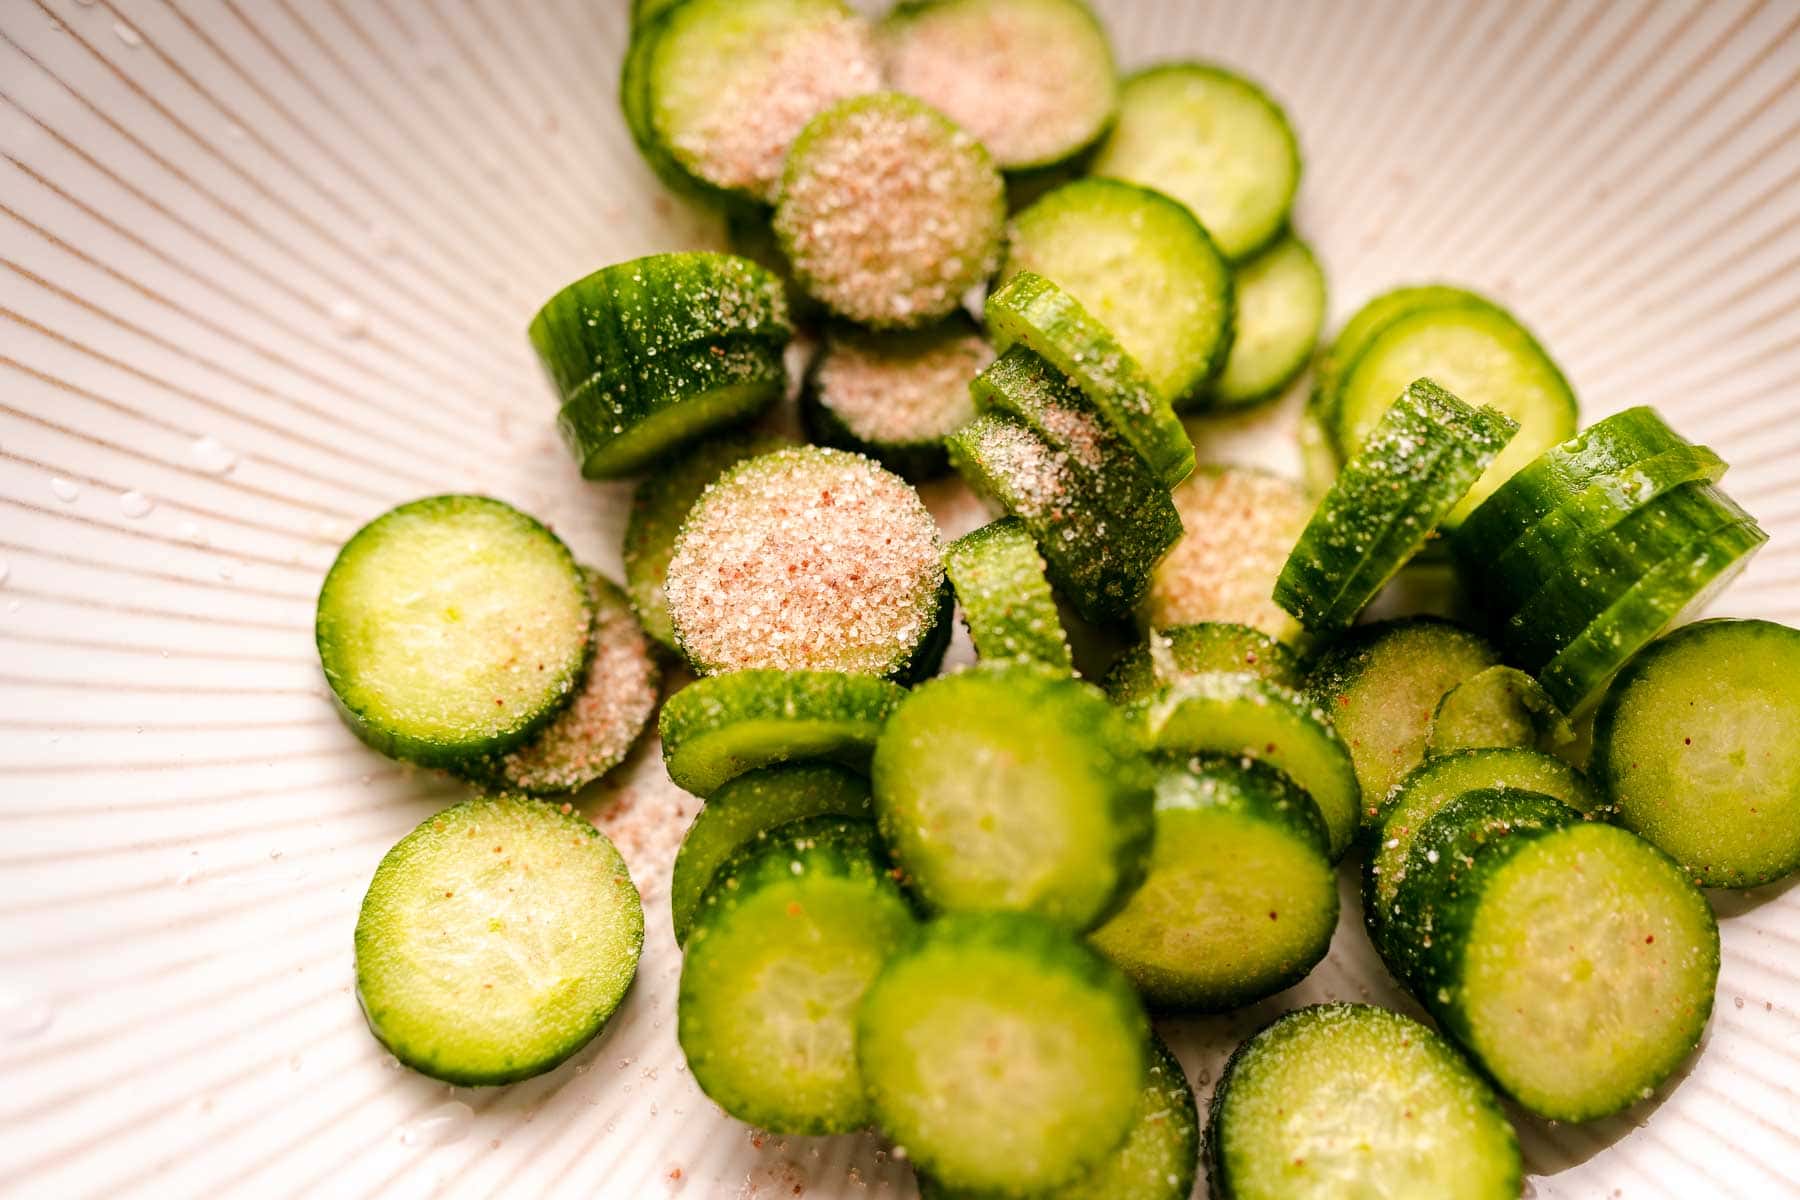 Cucumber slices topped with pink salt.